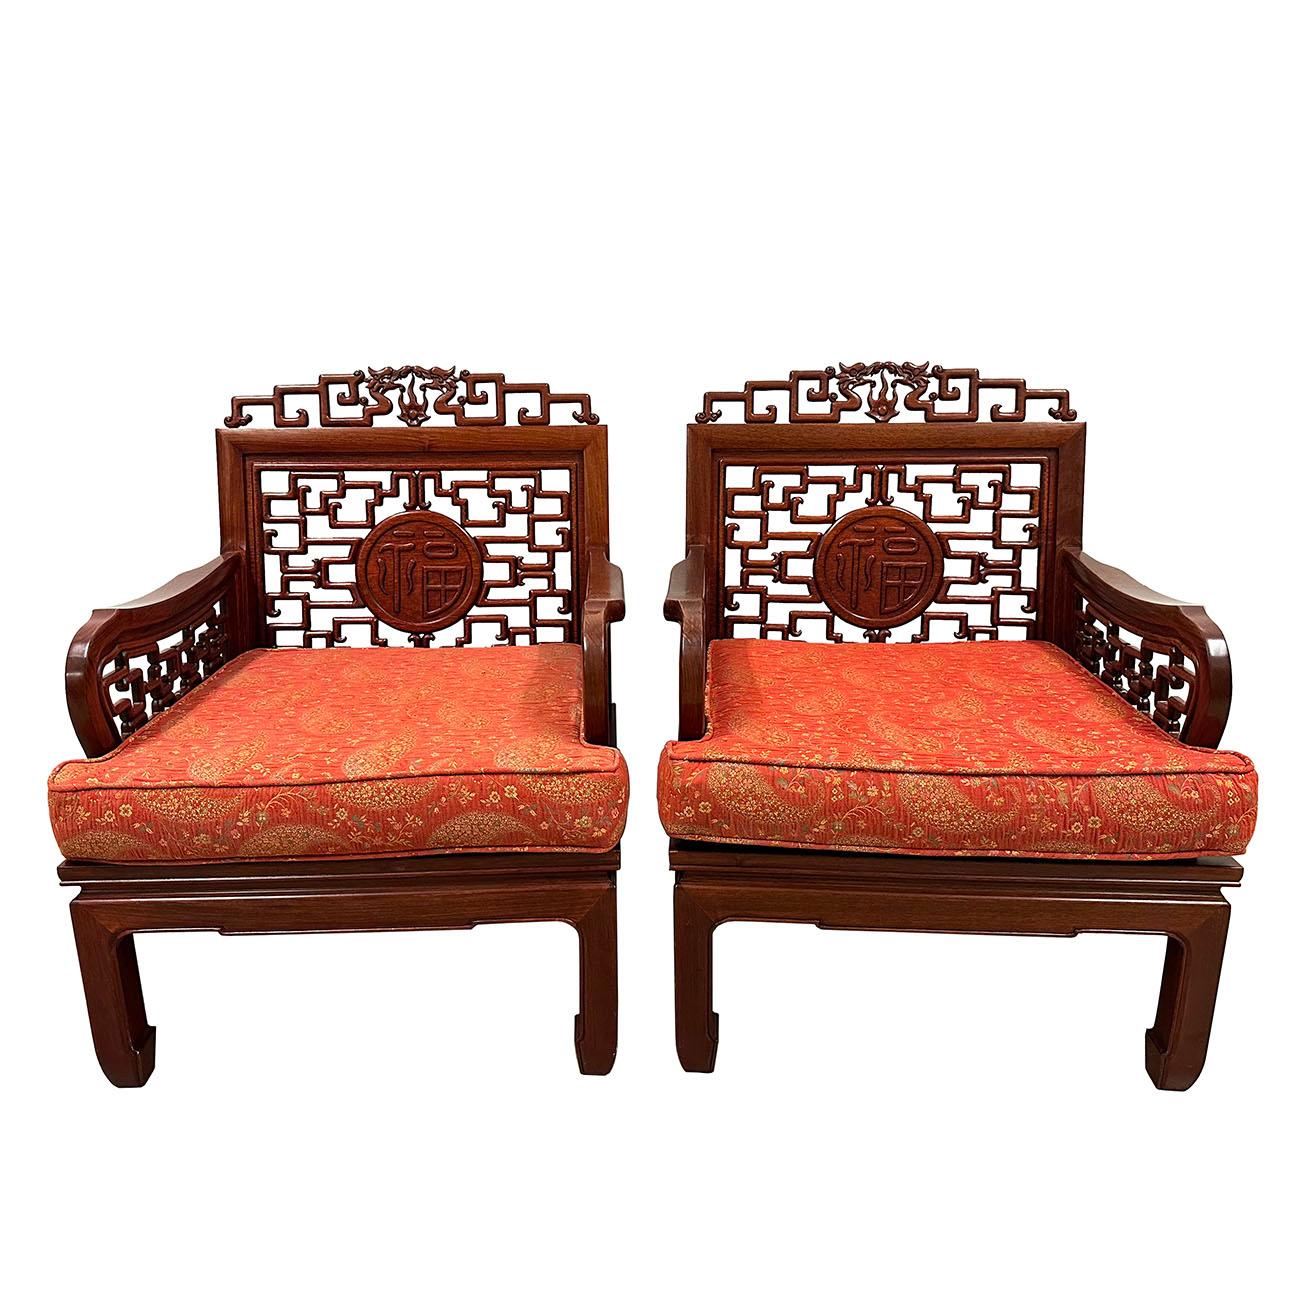  This set of gorgeous Chinese Rosewood Carved Living room Chairs have about 70 years history and still maintained its original condition, very smooth to touch, full of patina. They were hand made and hand carved with solid rosewood. Very heavy and